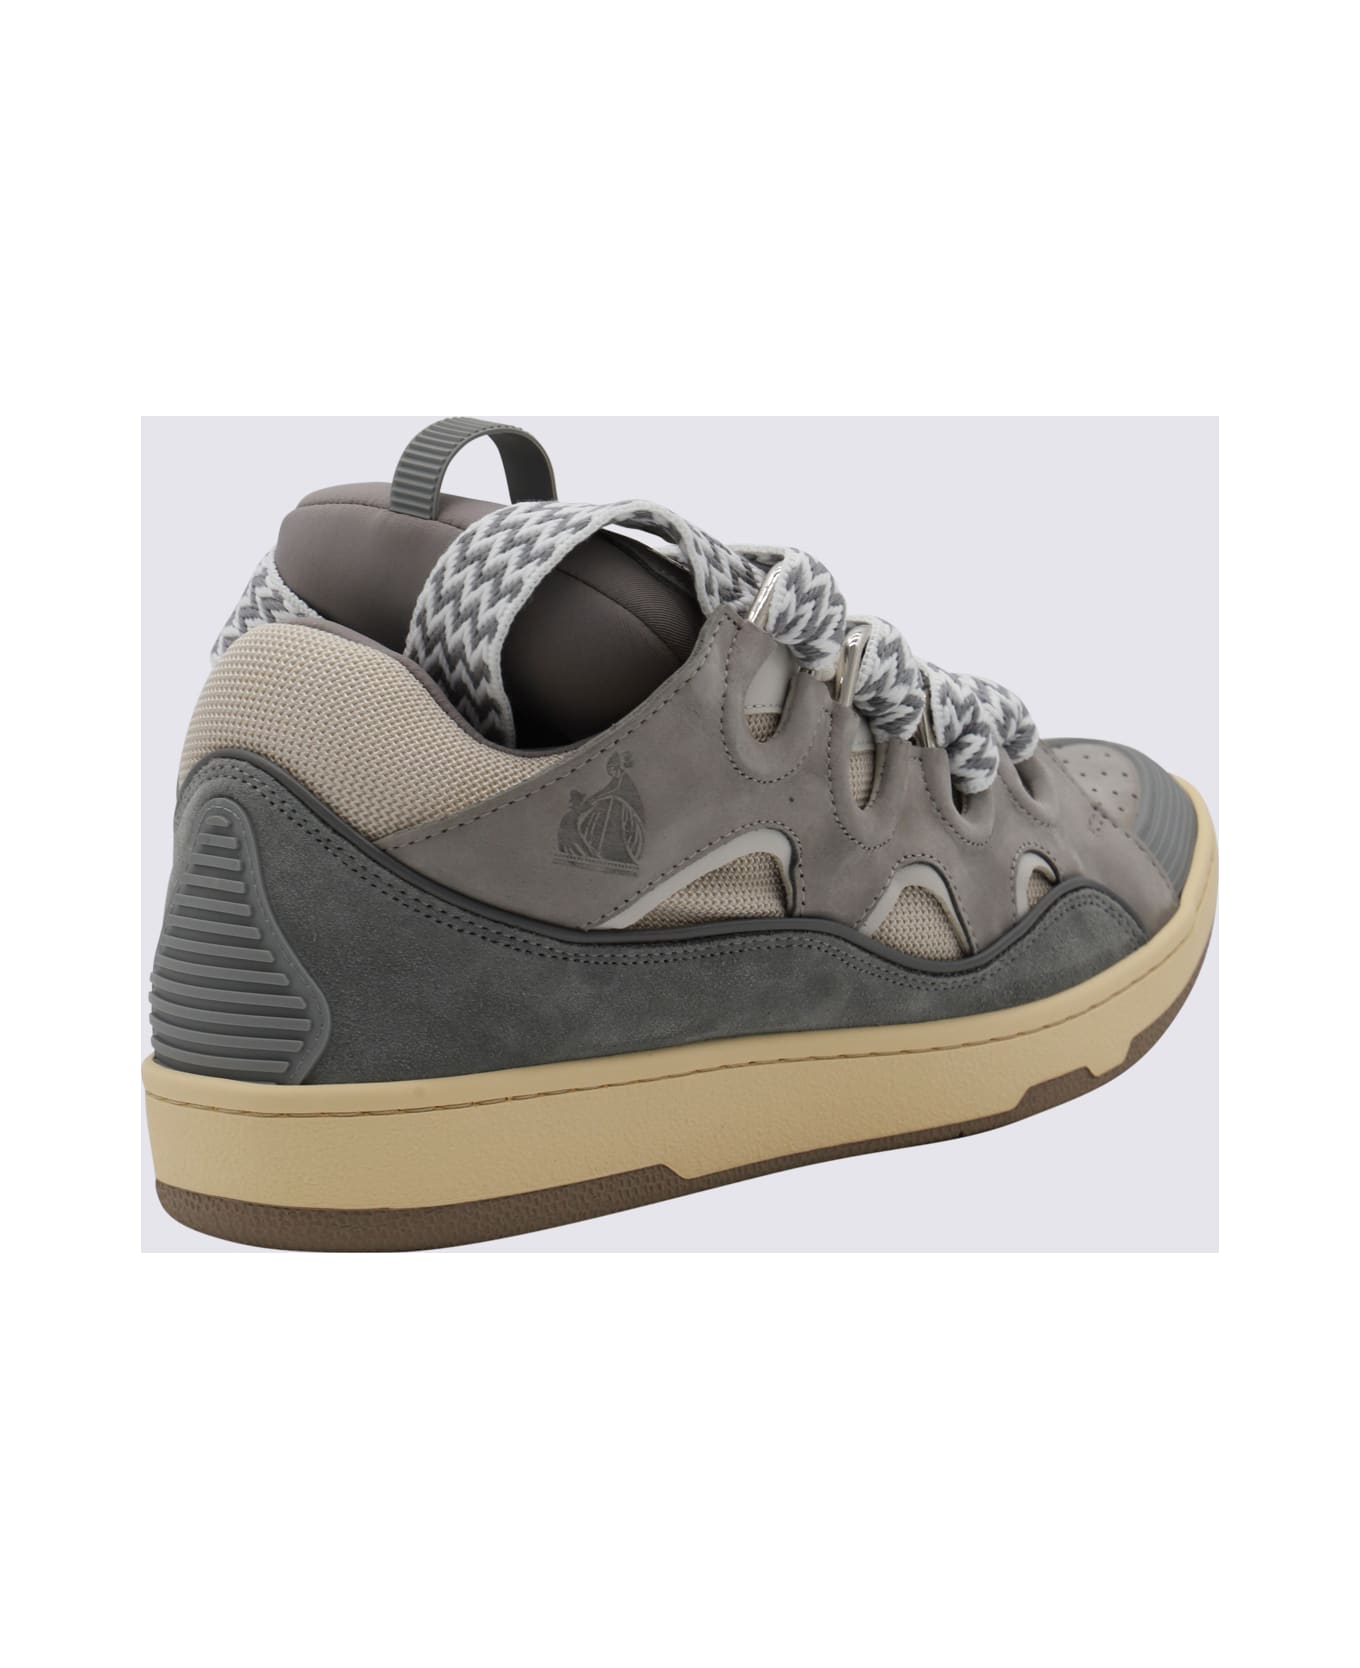 Lanvin Grey Leather Curb Sneakers - Grey